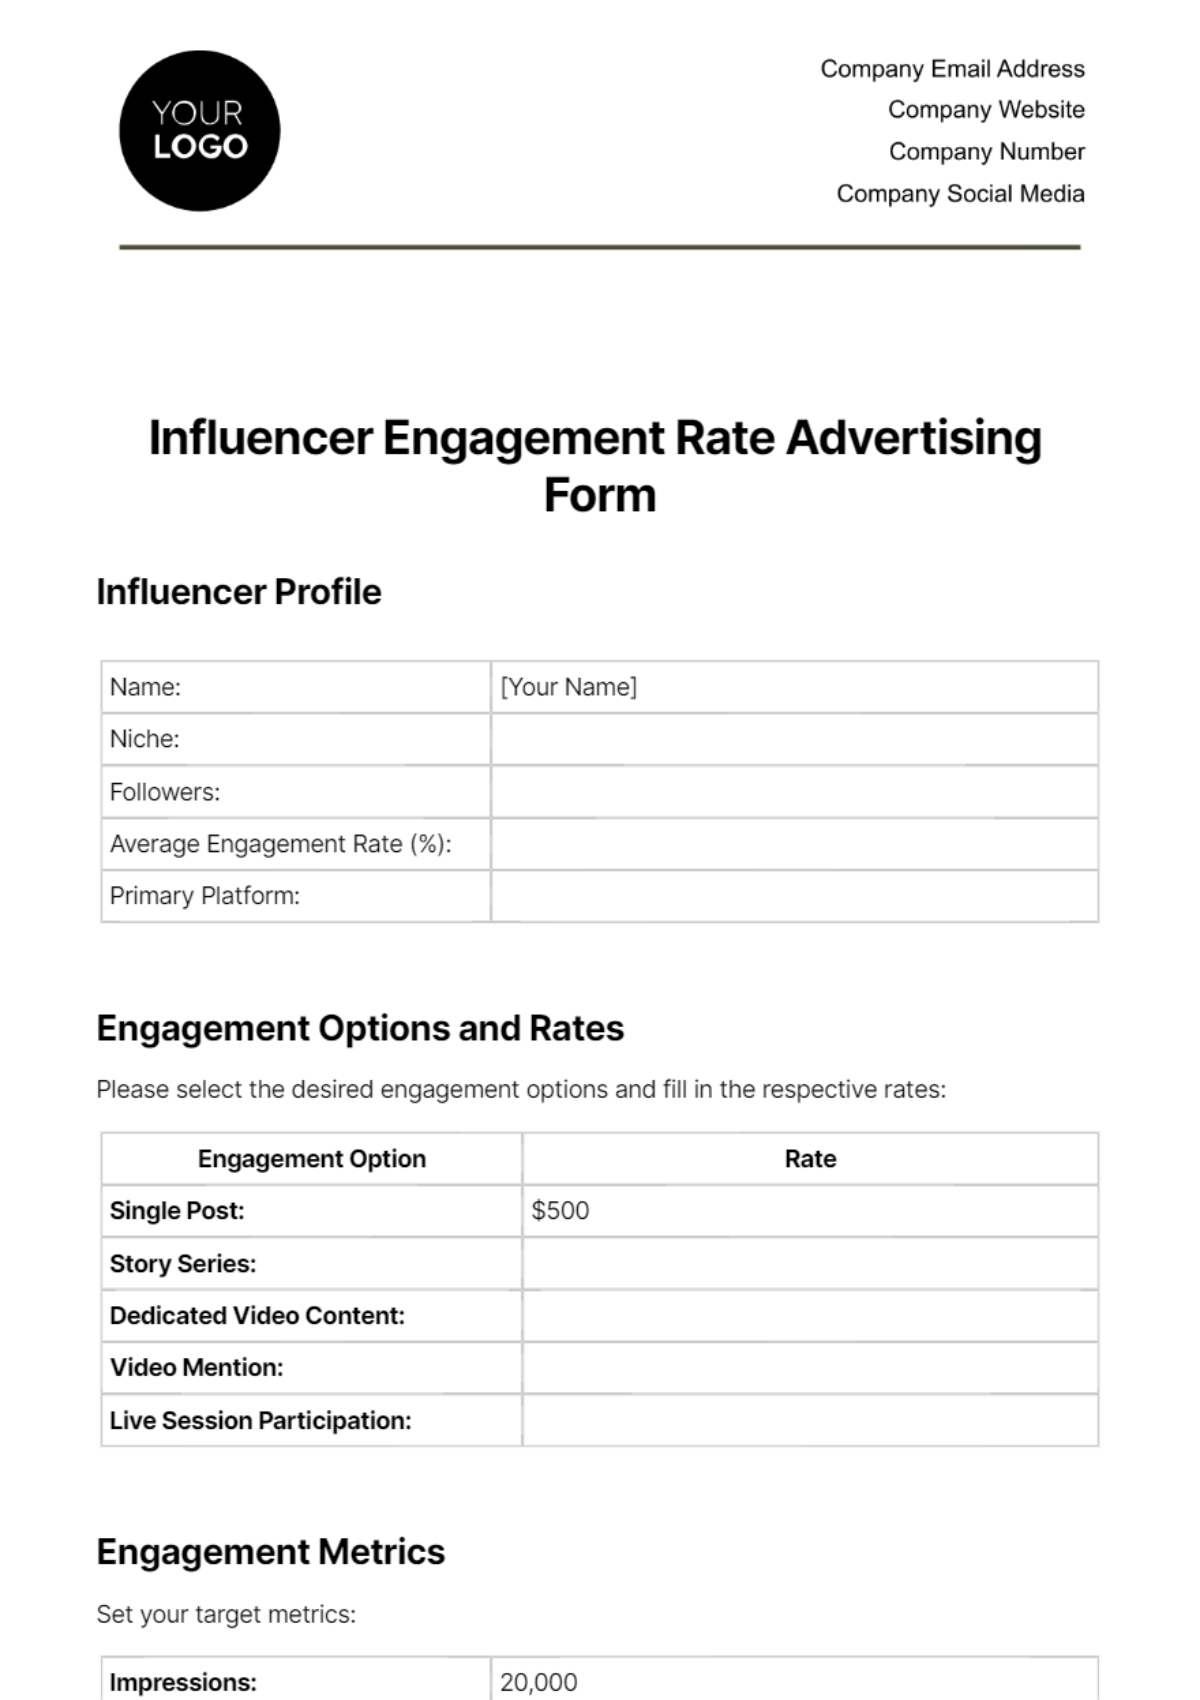 Influencer Engagement Rate Advertising Form Template